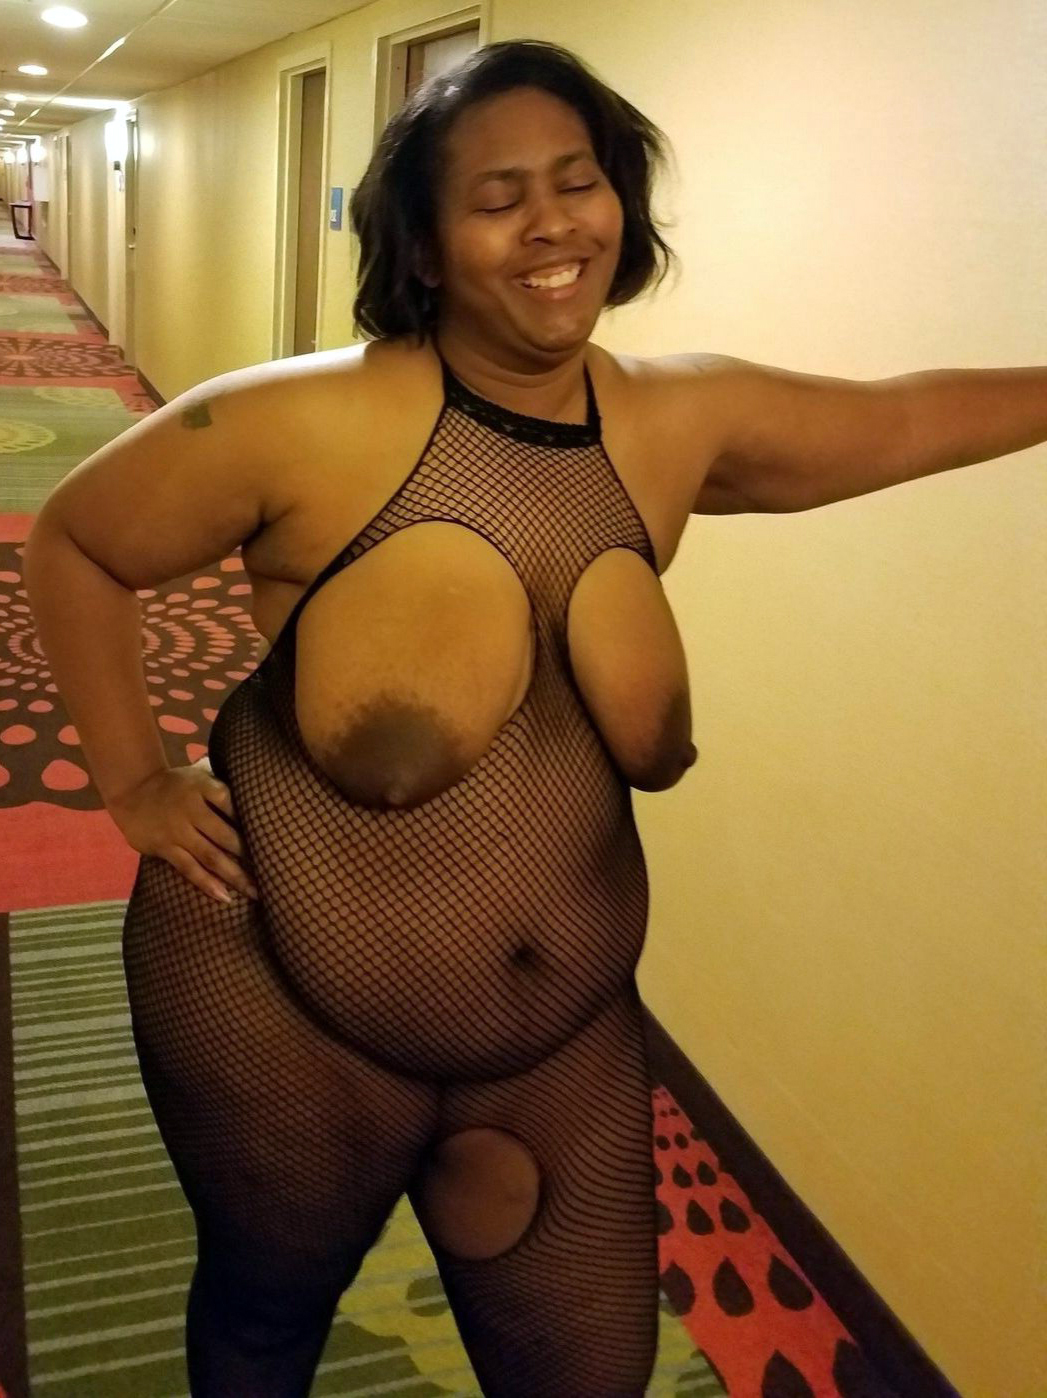 frowning bbw models amature porn